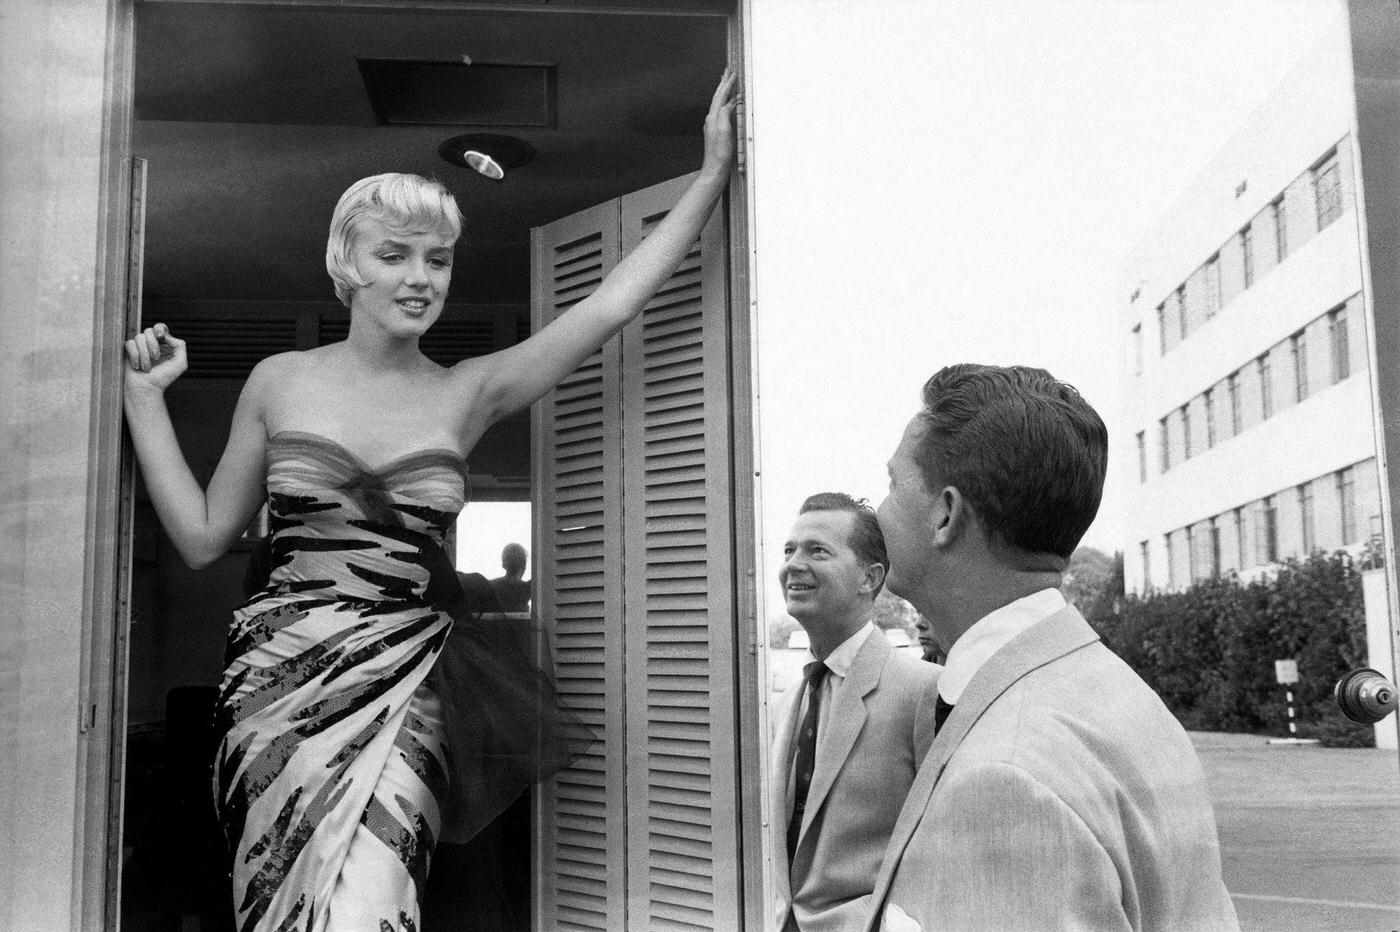 Marilyn Monroe stands in a doorway wearing a tiger-striped dress in 1954 during the filming of "The Seven Year Itch"